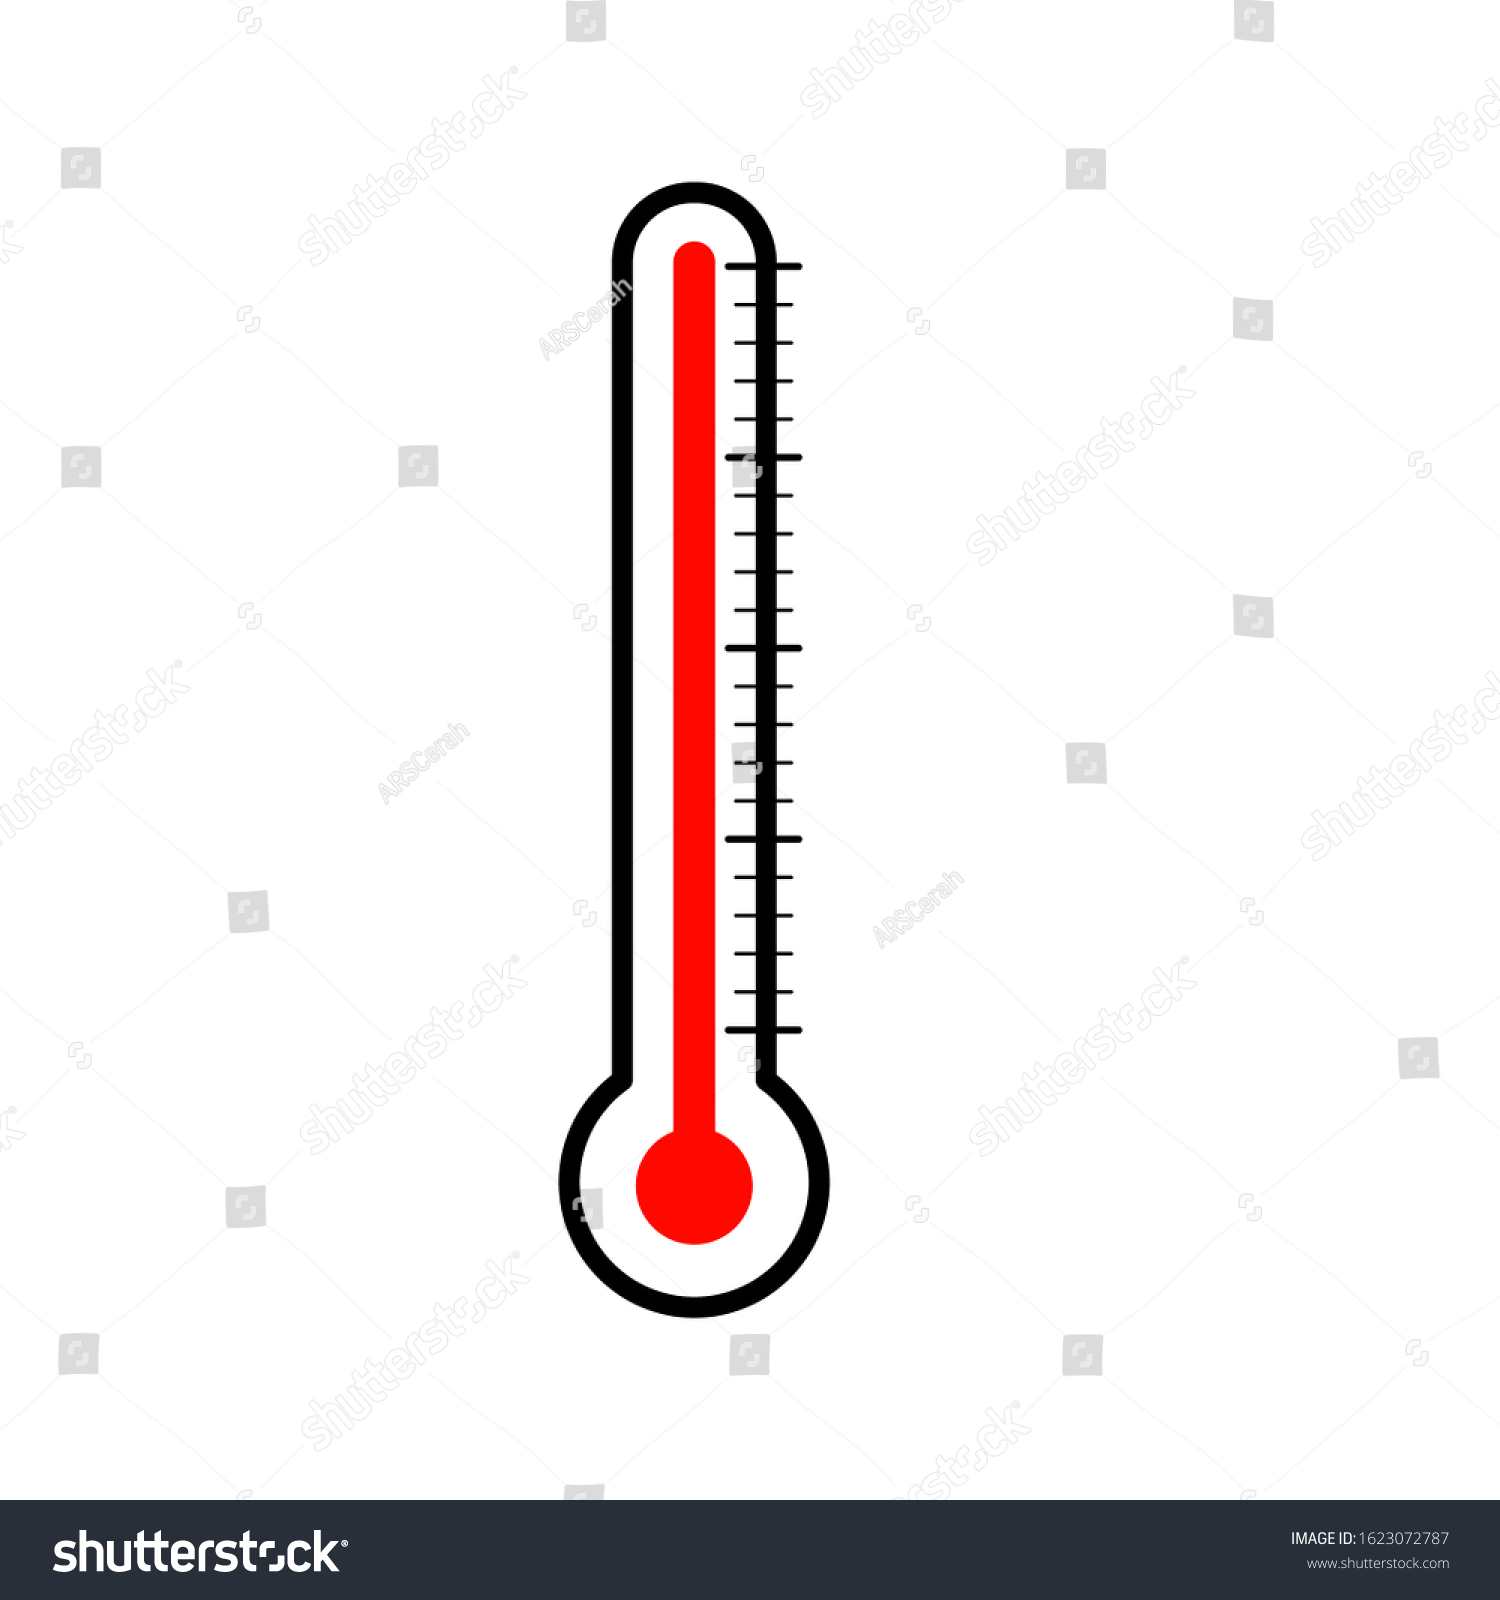 Thermometer outdoor illustration celsius fahrenheit thermometers measuring. Hot temperature icon set flat style thermometer outdoor. Celsius fahrenheit thermometers outdoor. Thermometer outdoor logo. #1623072787